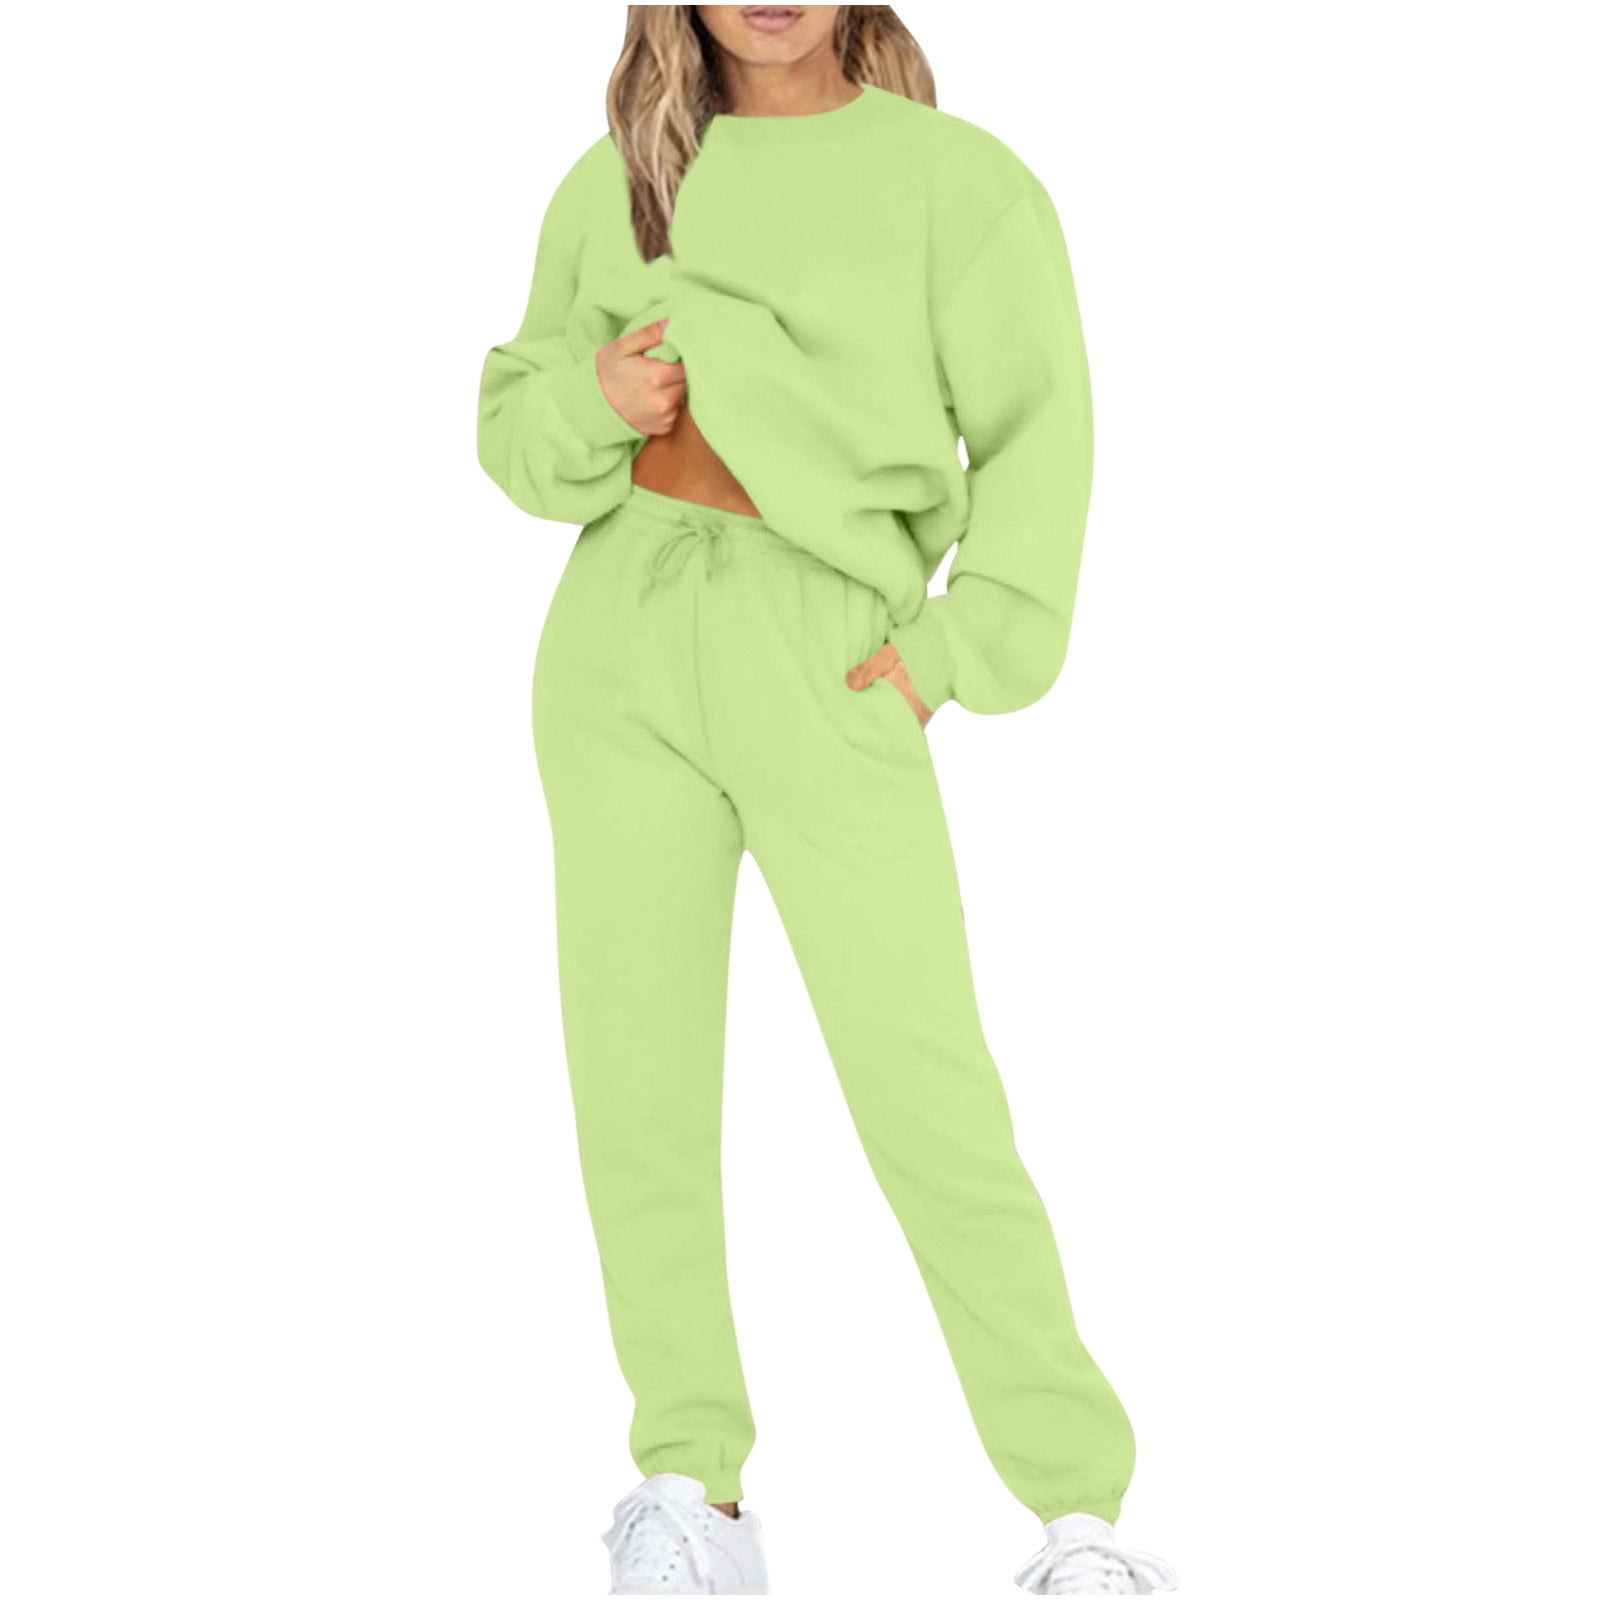 safuny Pants for Women Casual 2 Piece Outfits Long Sleeve Loose Tops Skinny  Round Neck Long Pants Sets Sweatshirts Suit with Pocket Mint Green 4XL